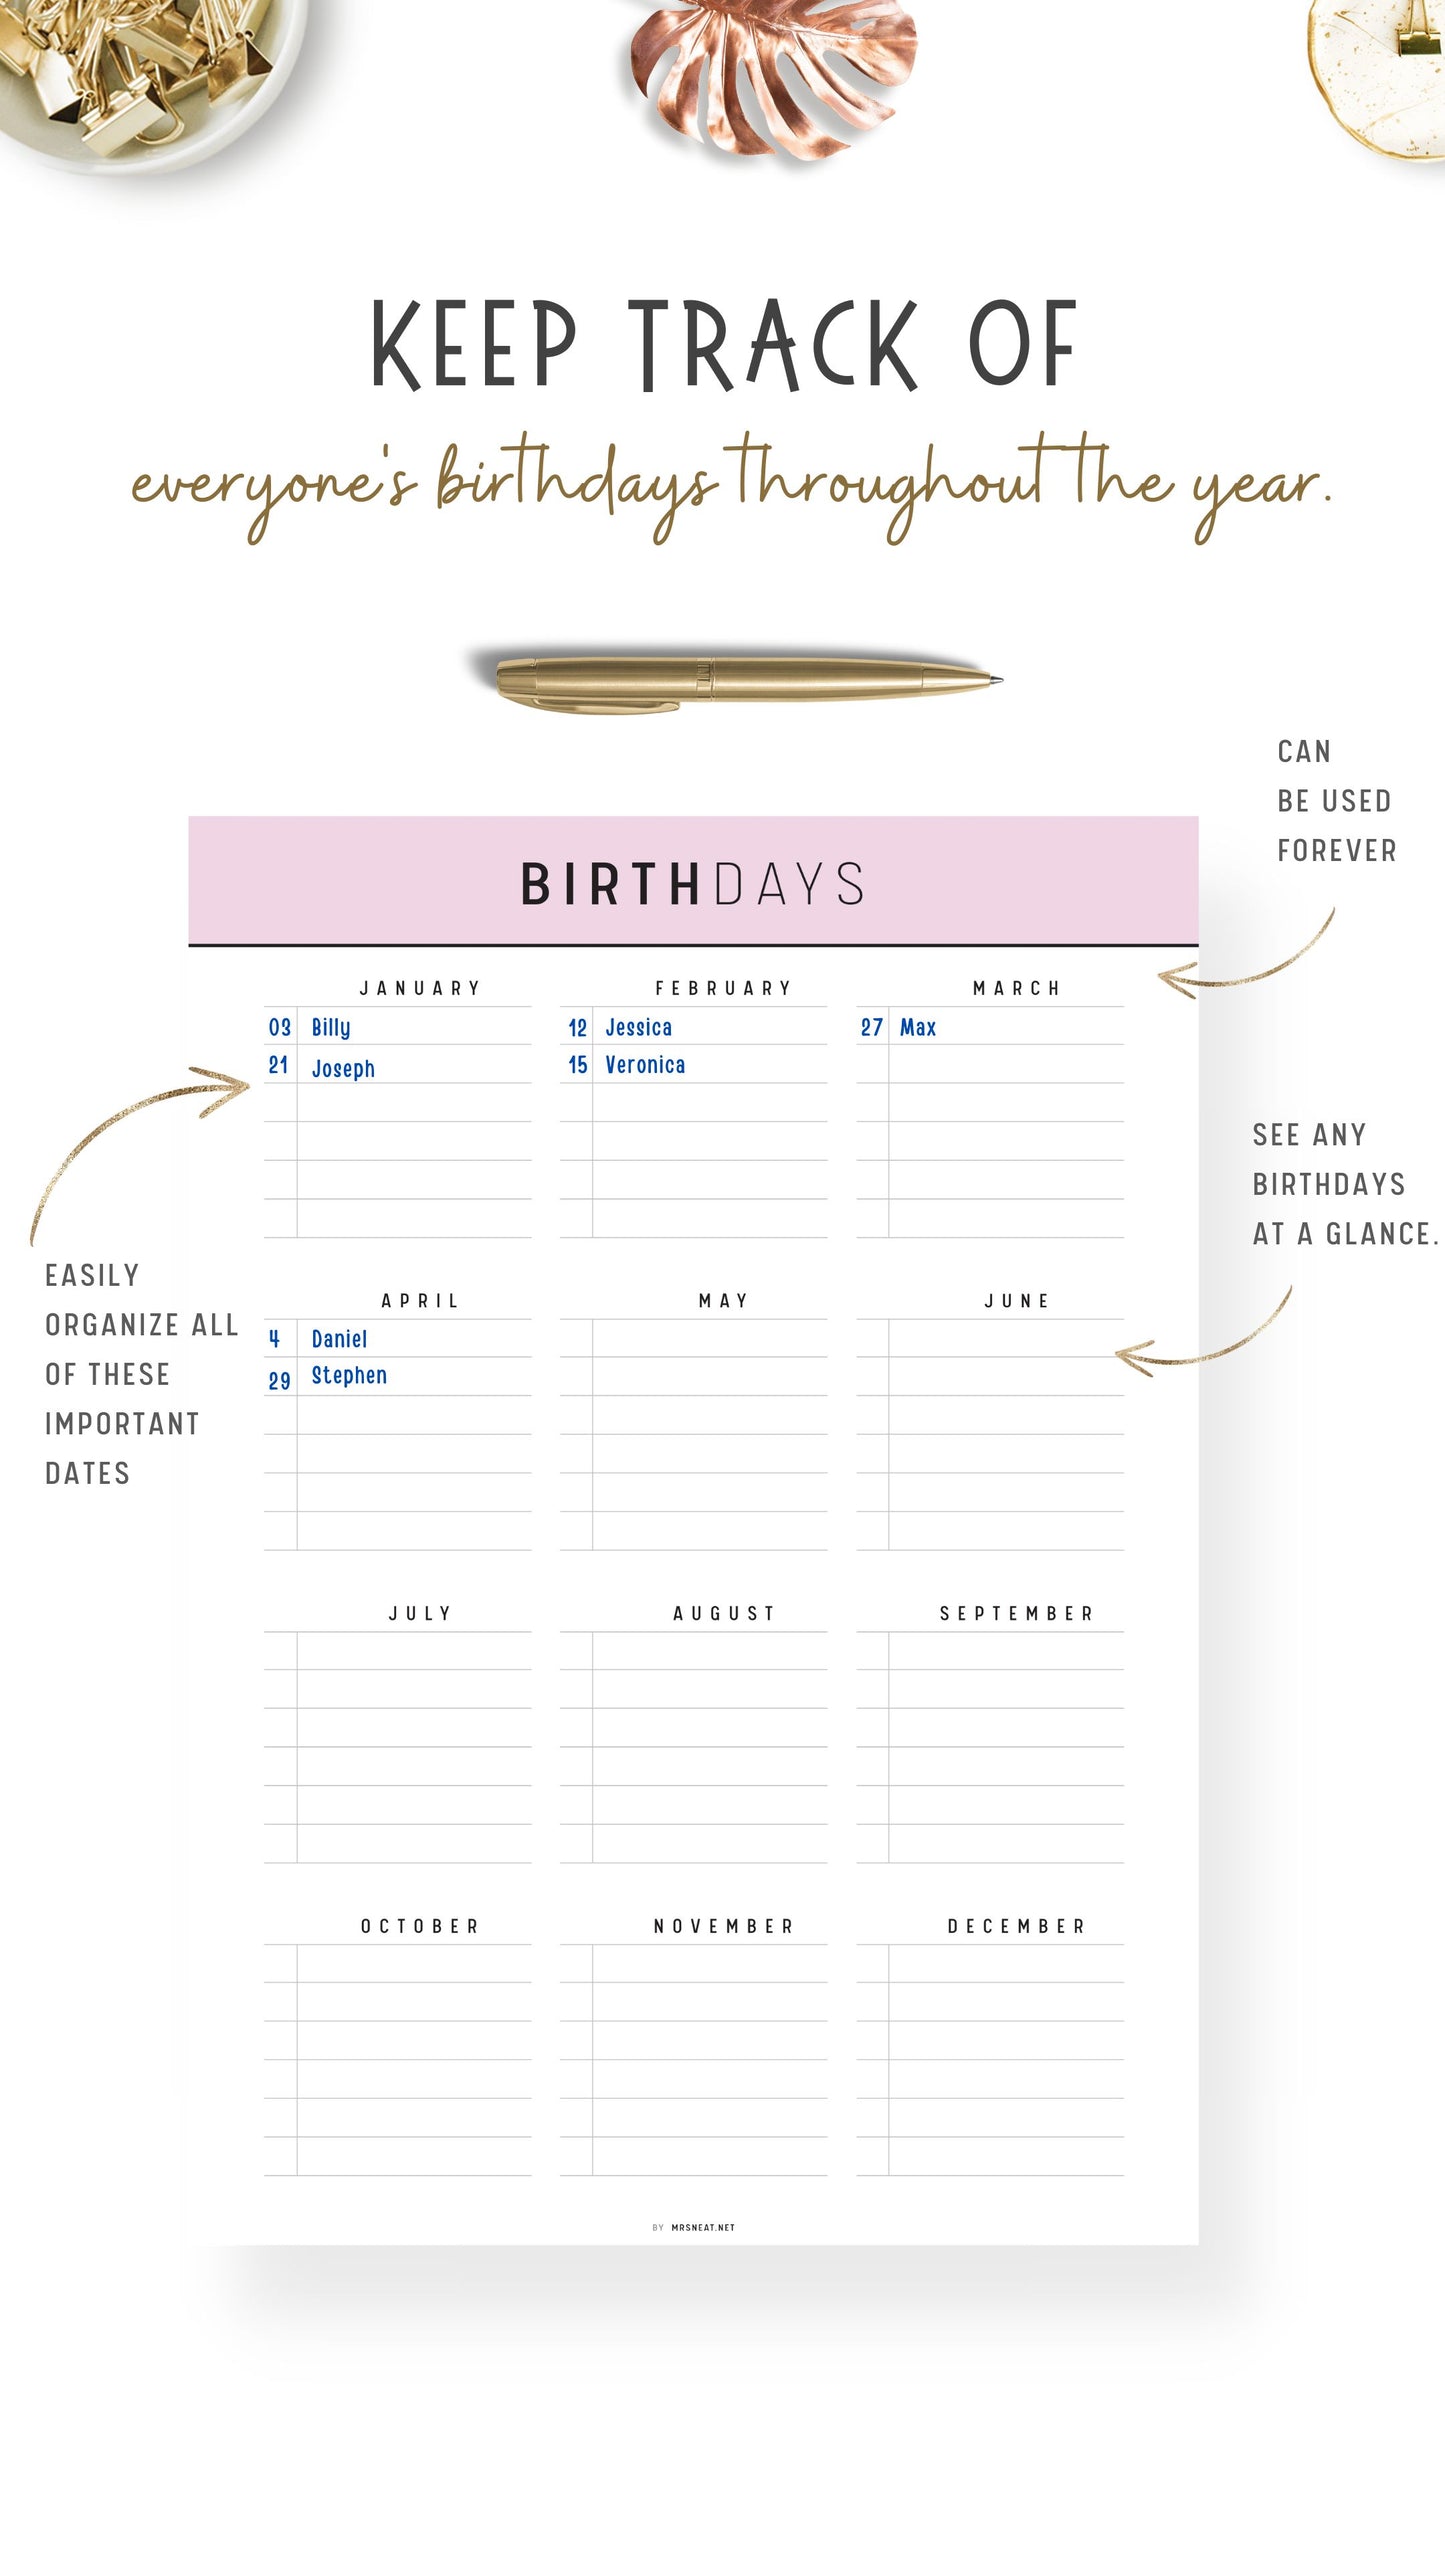 How to use Birthday Tracker Template Printable